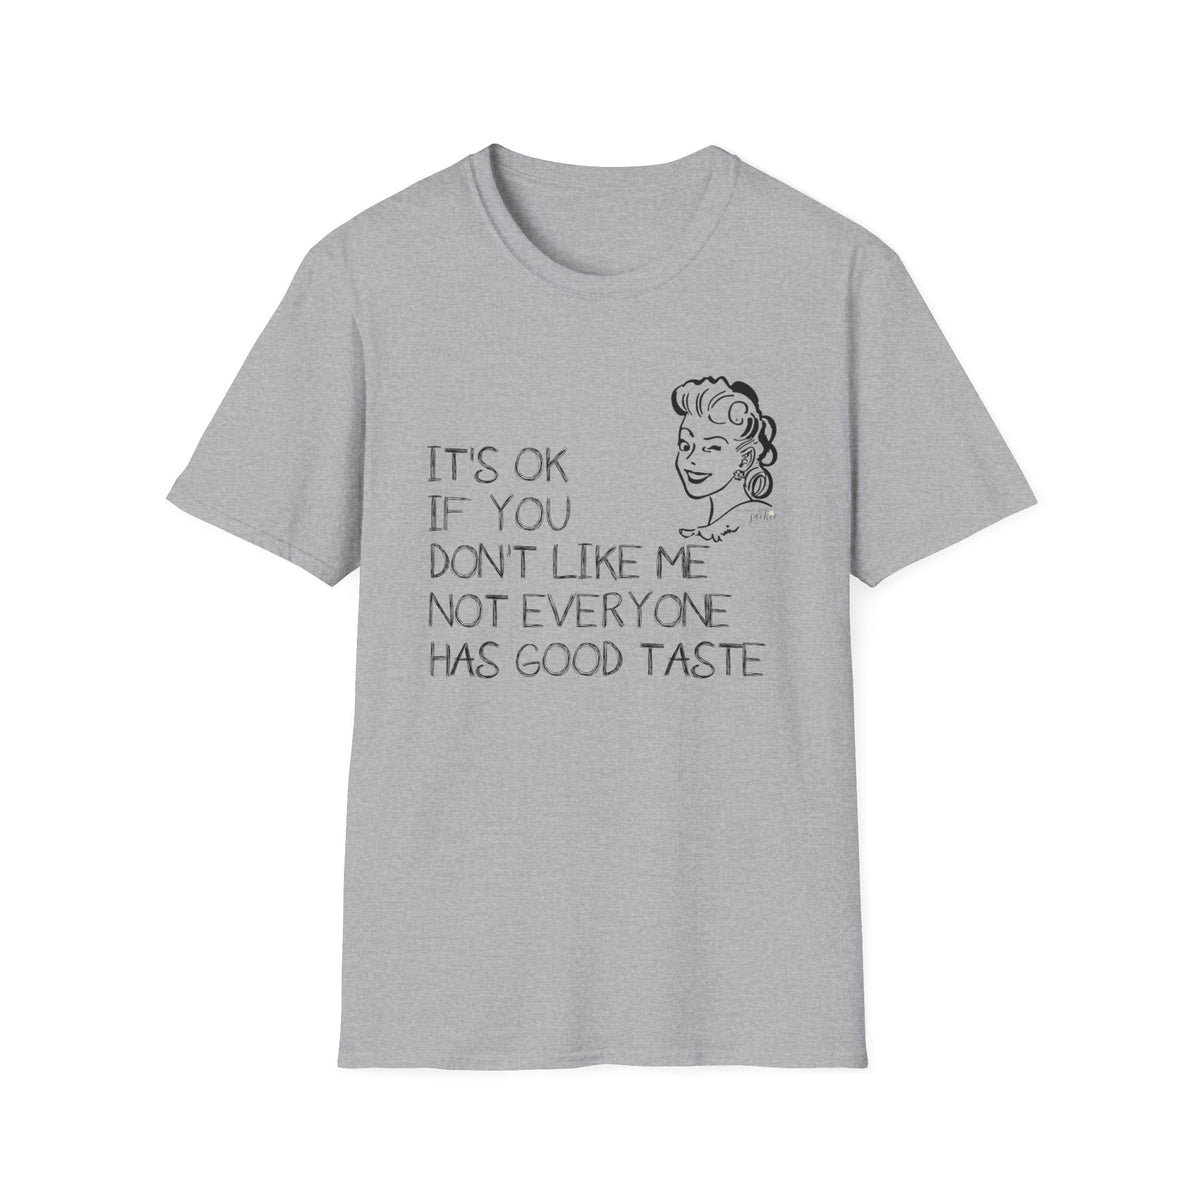 It's OK if you don't like me - Softstyle T-Shirt